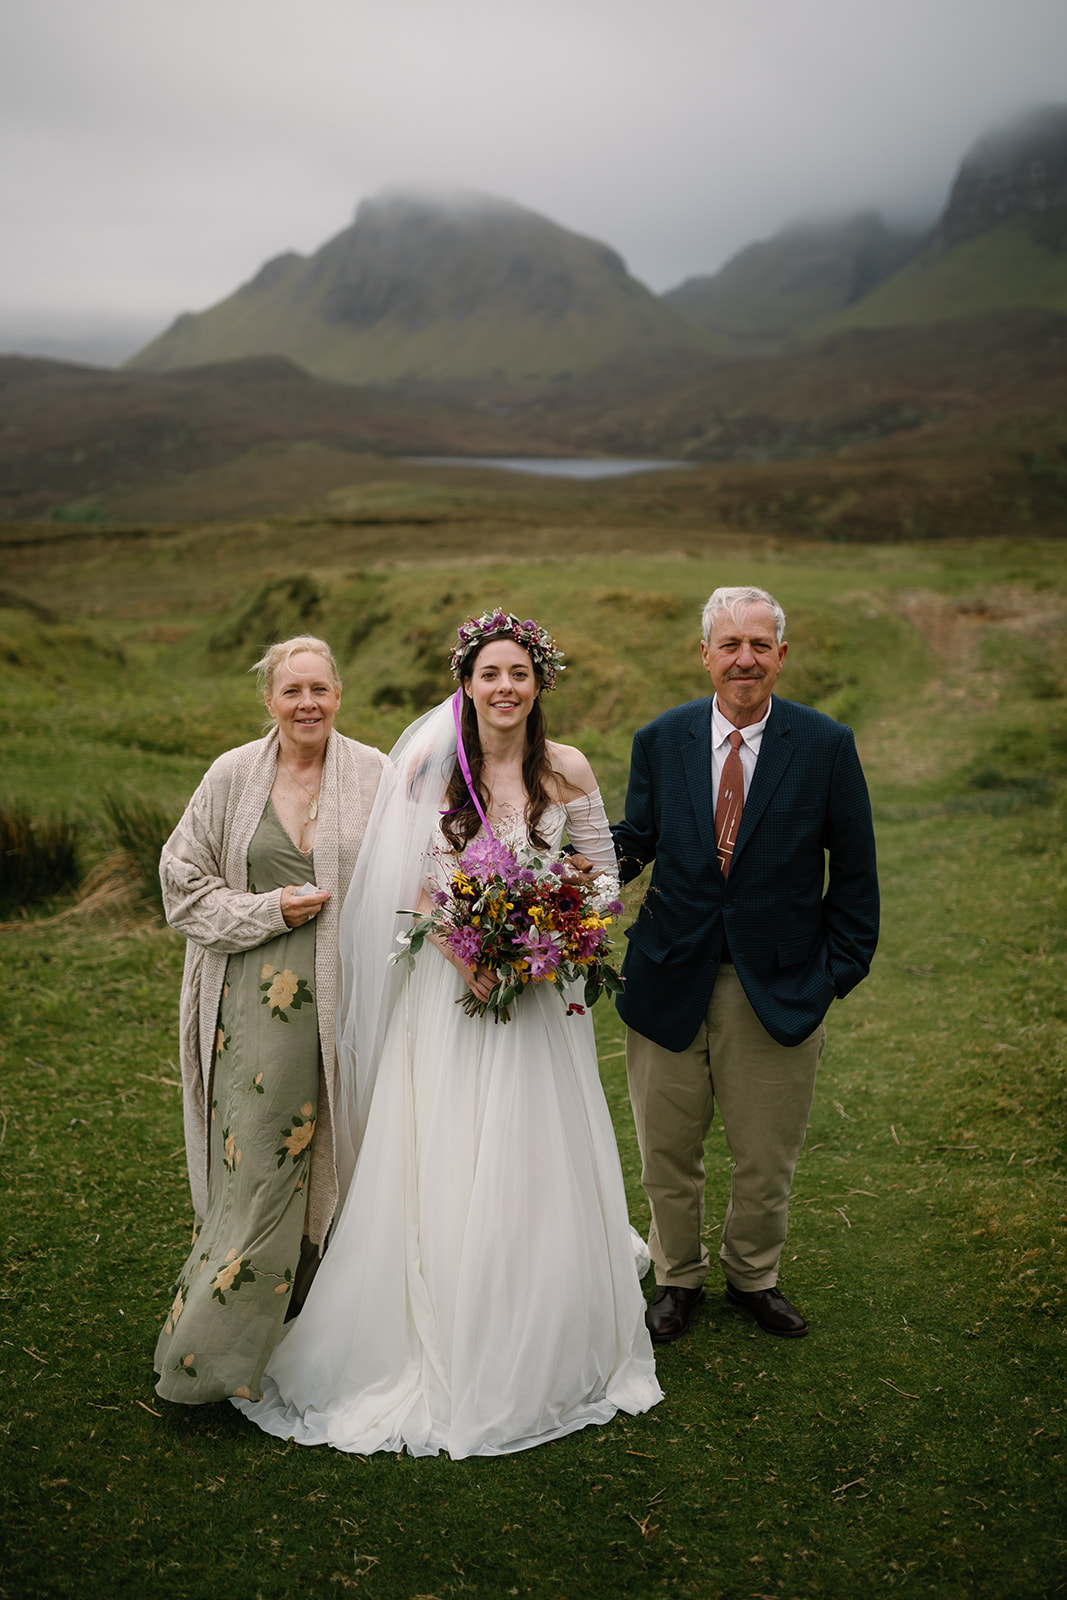 Becca and her parents, accompanied by the melodic notes of a bagpipe, walk toward the ceremony spot at the Isle of Skye